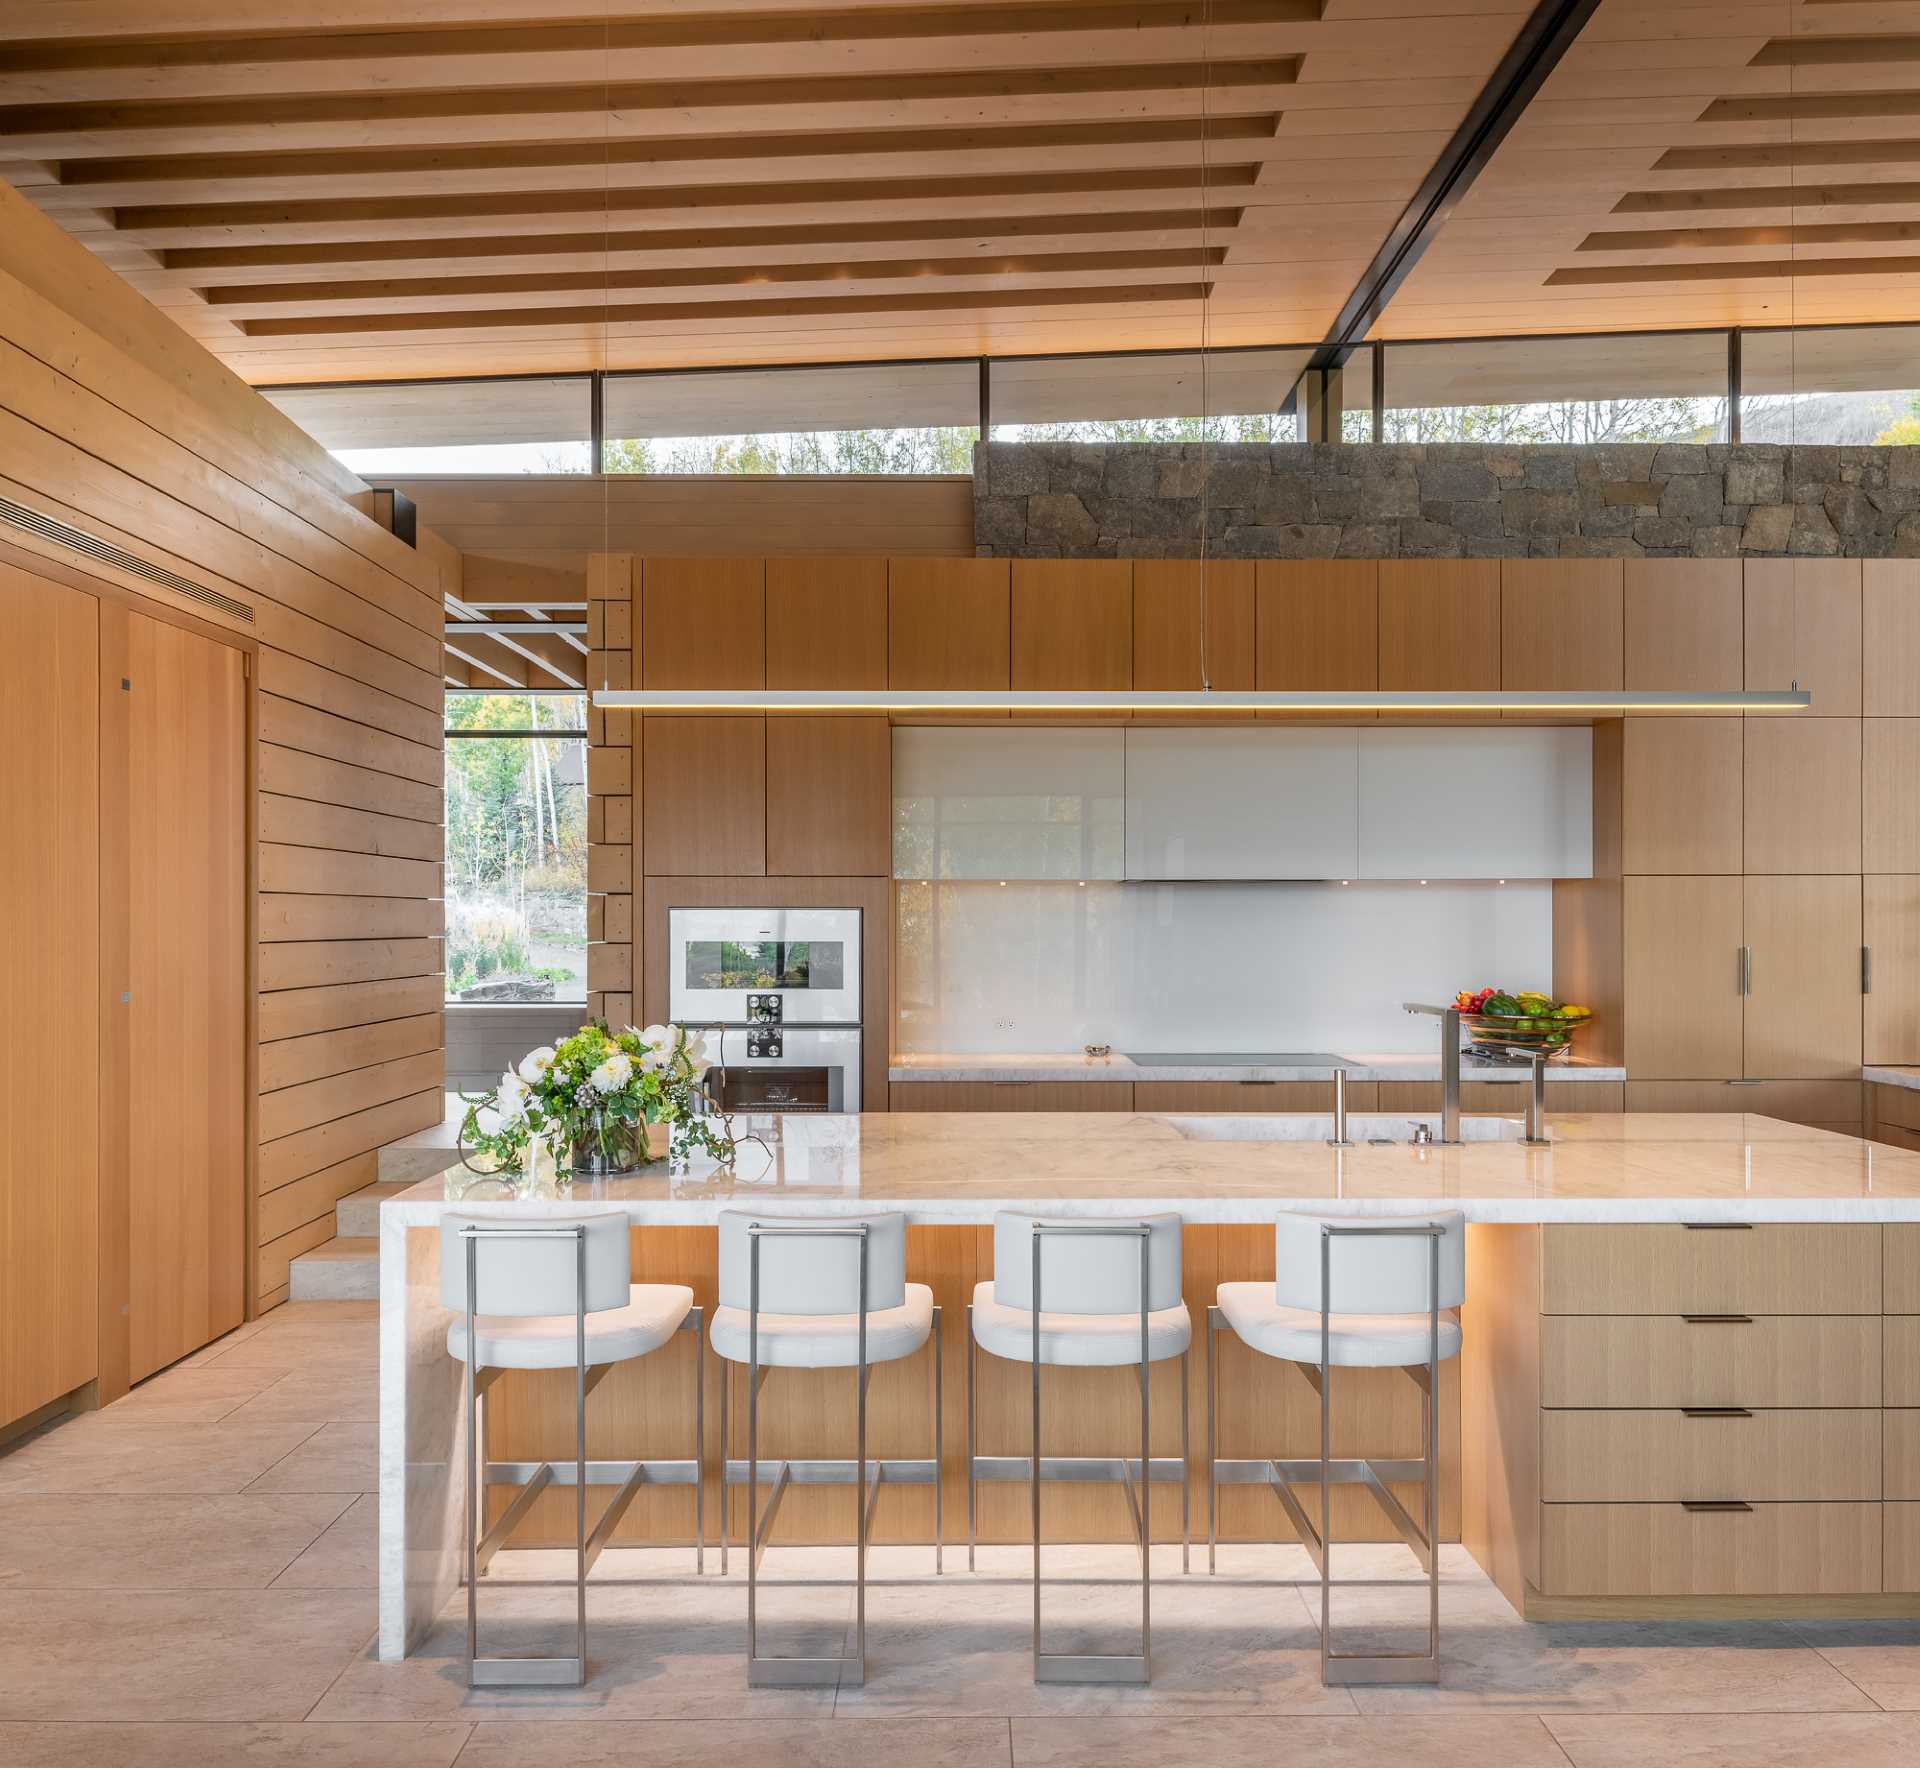 Clerestory windows in the wood kitchen allow for natural light to fill the interior, while a large island includes storage and a place for seating.